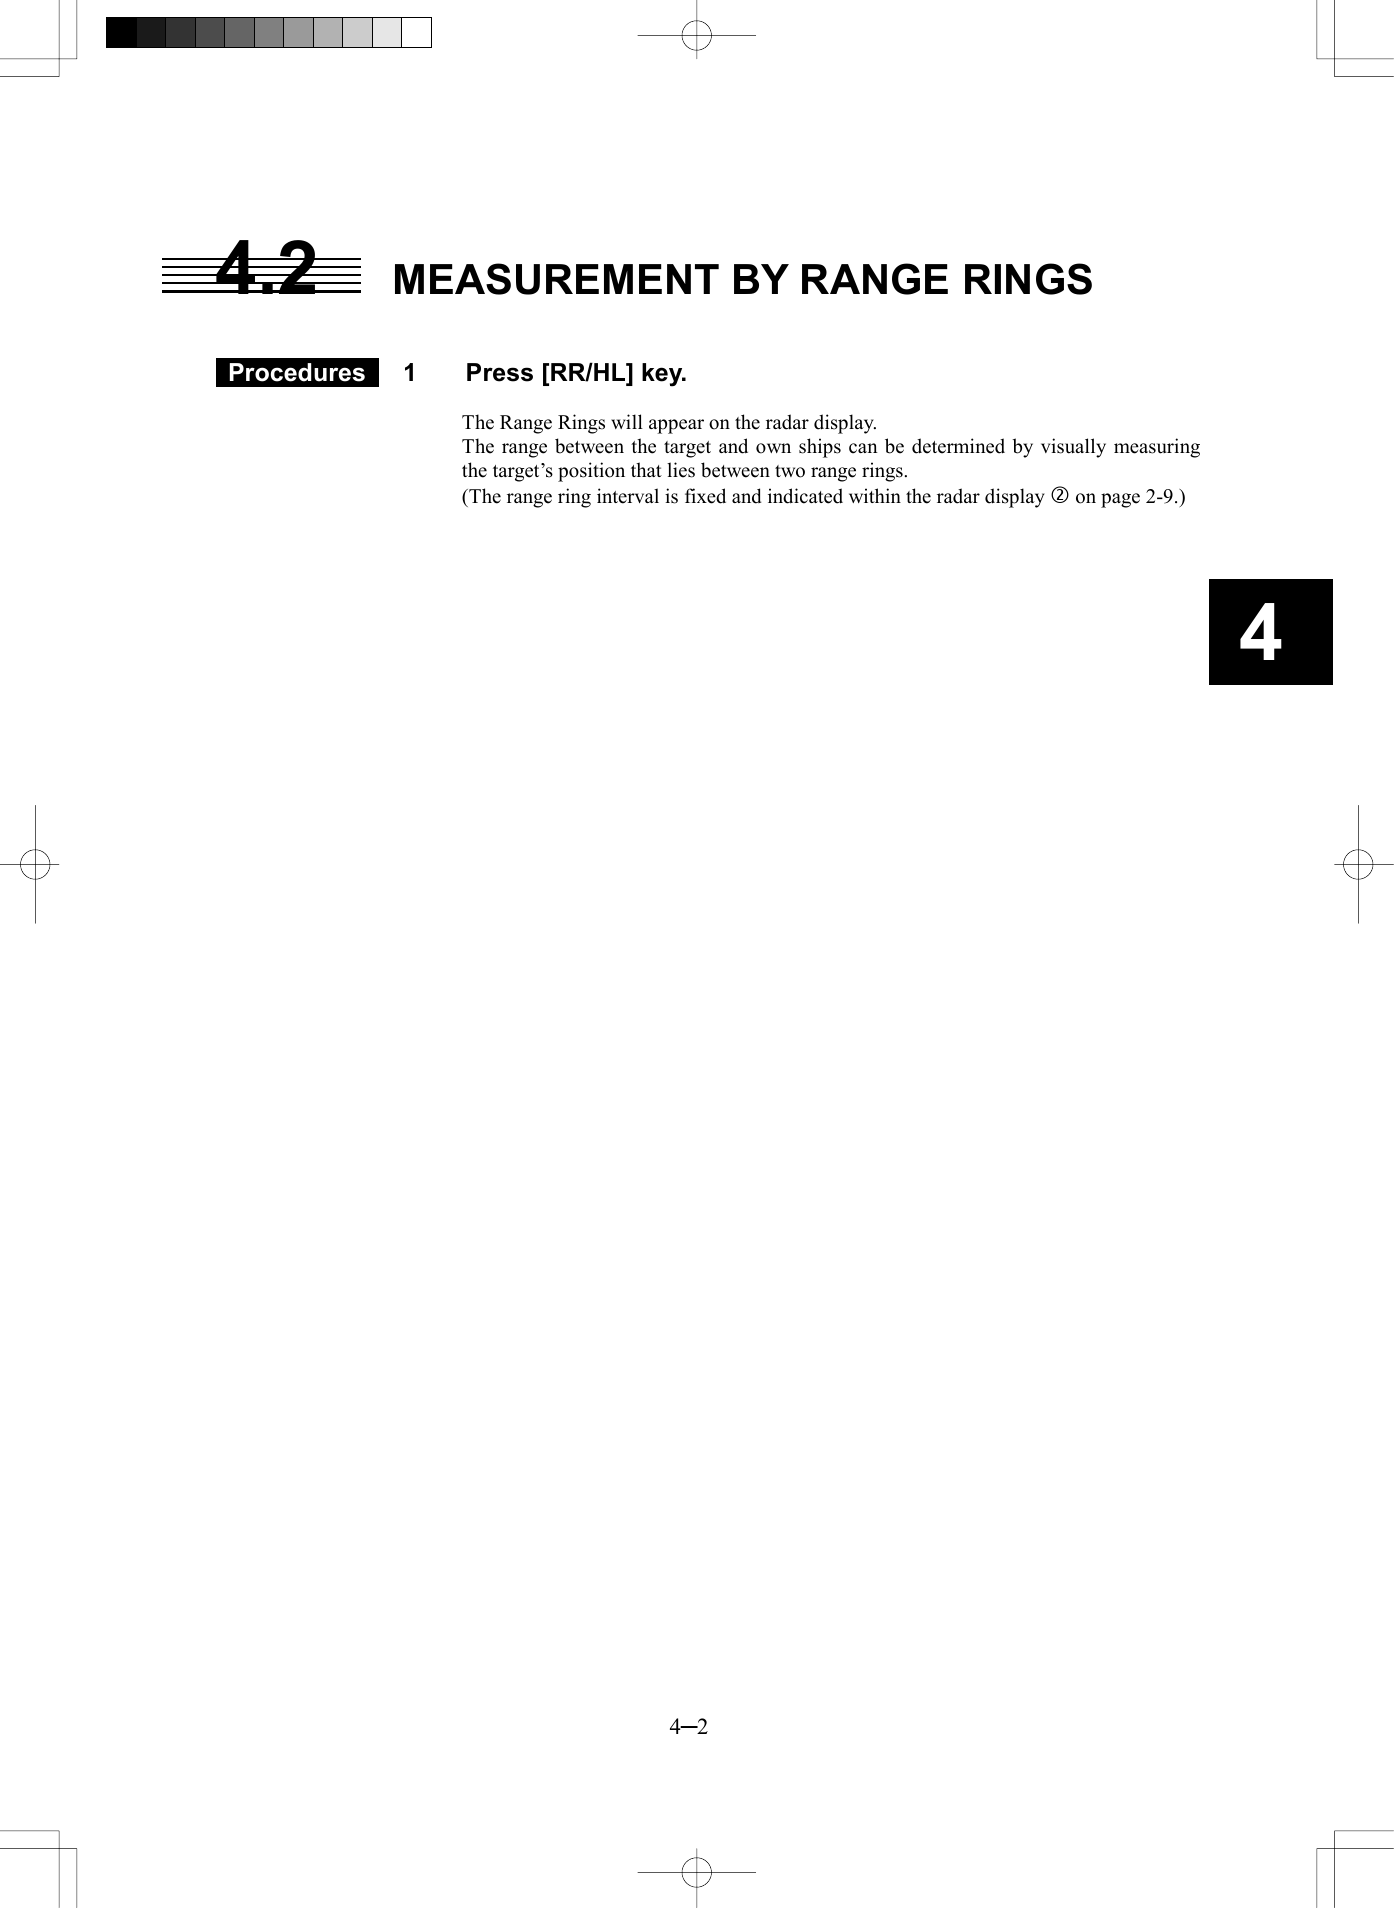   4─2 4 4.2  MEASUREMENT BY RANGE RINGS    Procedures   1  Press [RR/HL] key.  The Range Rings will appear on the radar display. The range between the target and own ships can be determined by visually measuring the target’s position that lies between two range rings.     (The range ring interval is fixed and indicated within the radar display  on page 2-9.)    